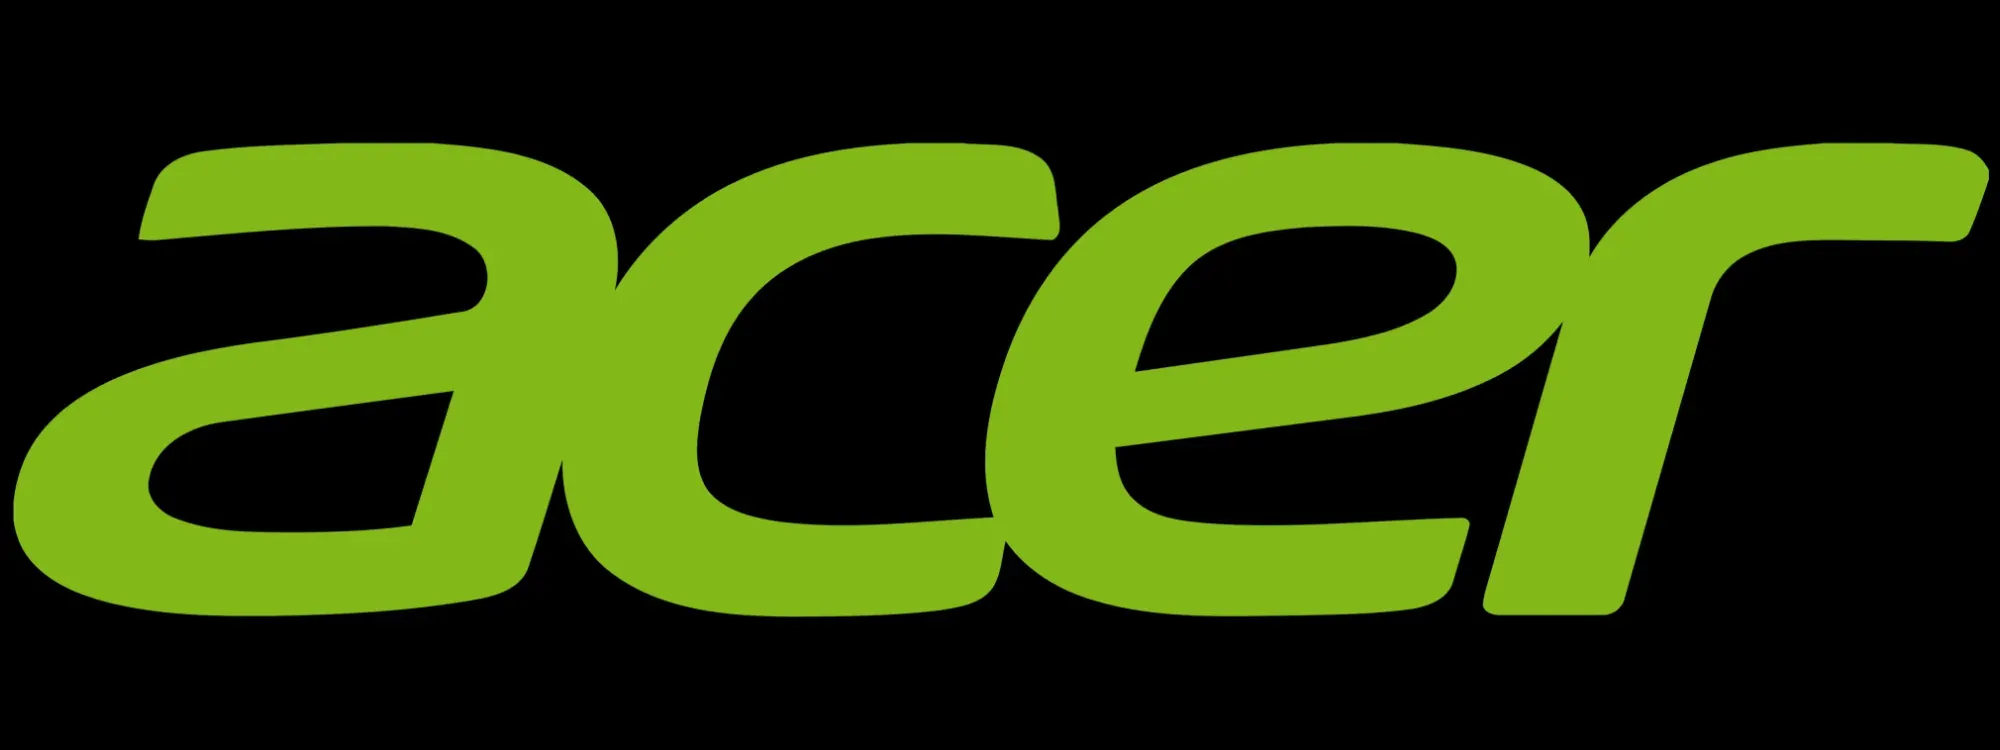 Download wallpapers Acer green logo, 4k, green brickwall, Acer logo,  brands, Acer neon logo, Acer for desktop with resolution 3840x2400. High  Quality HD pictures wallpapers